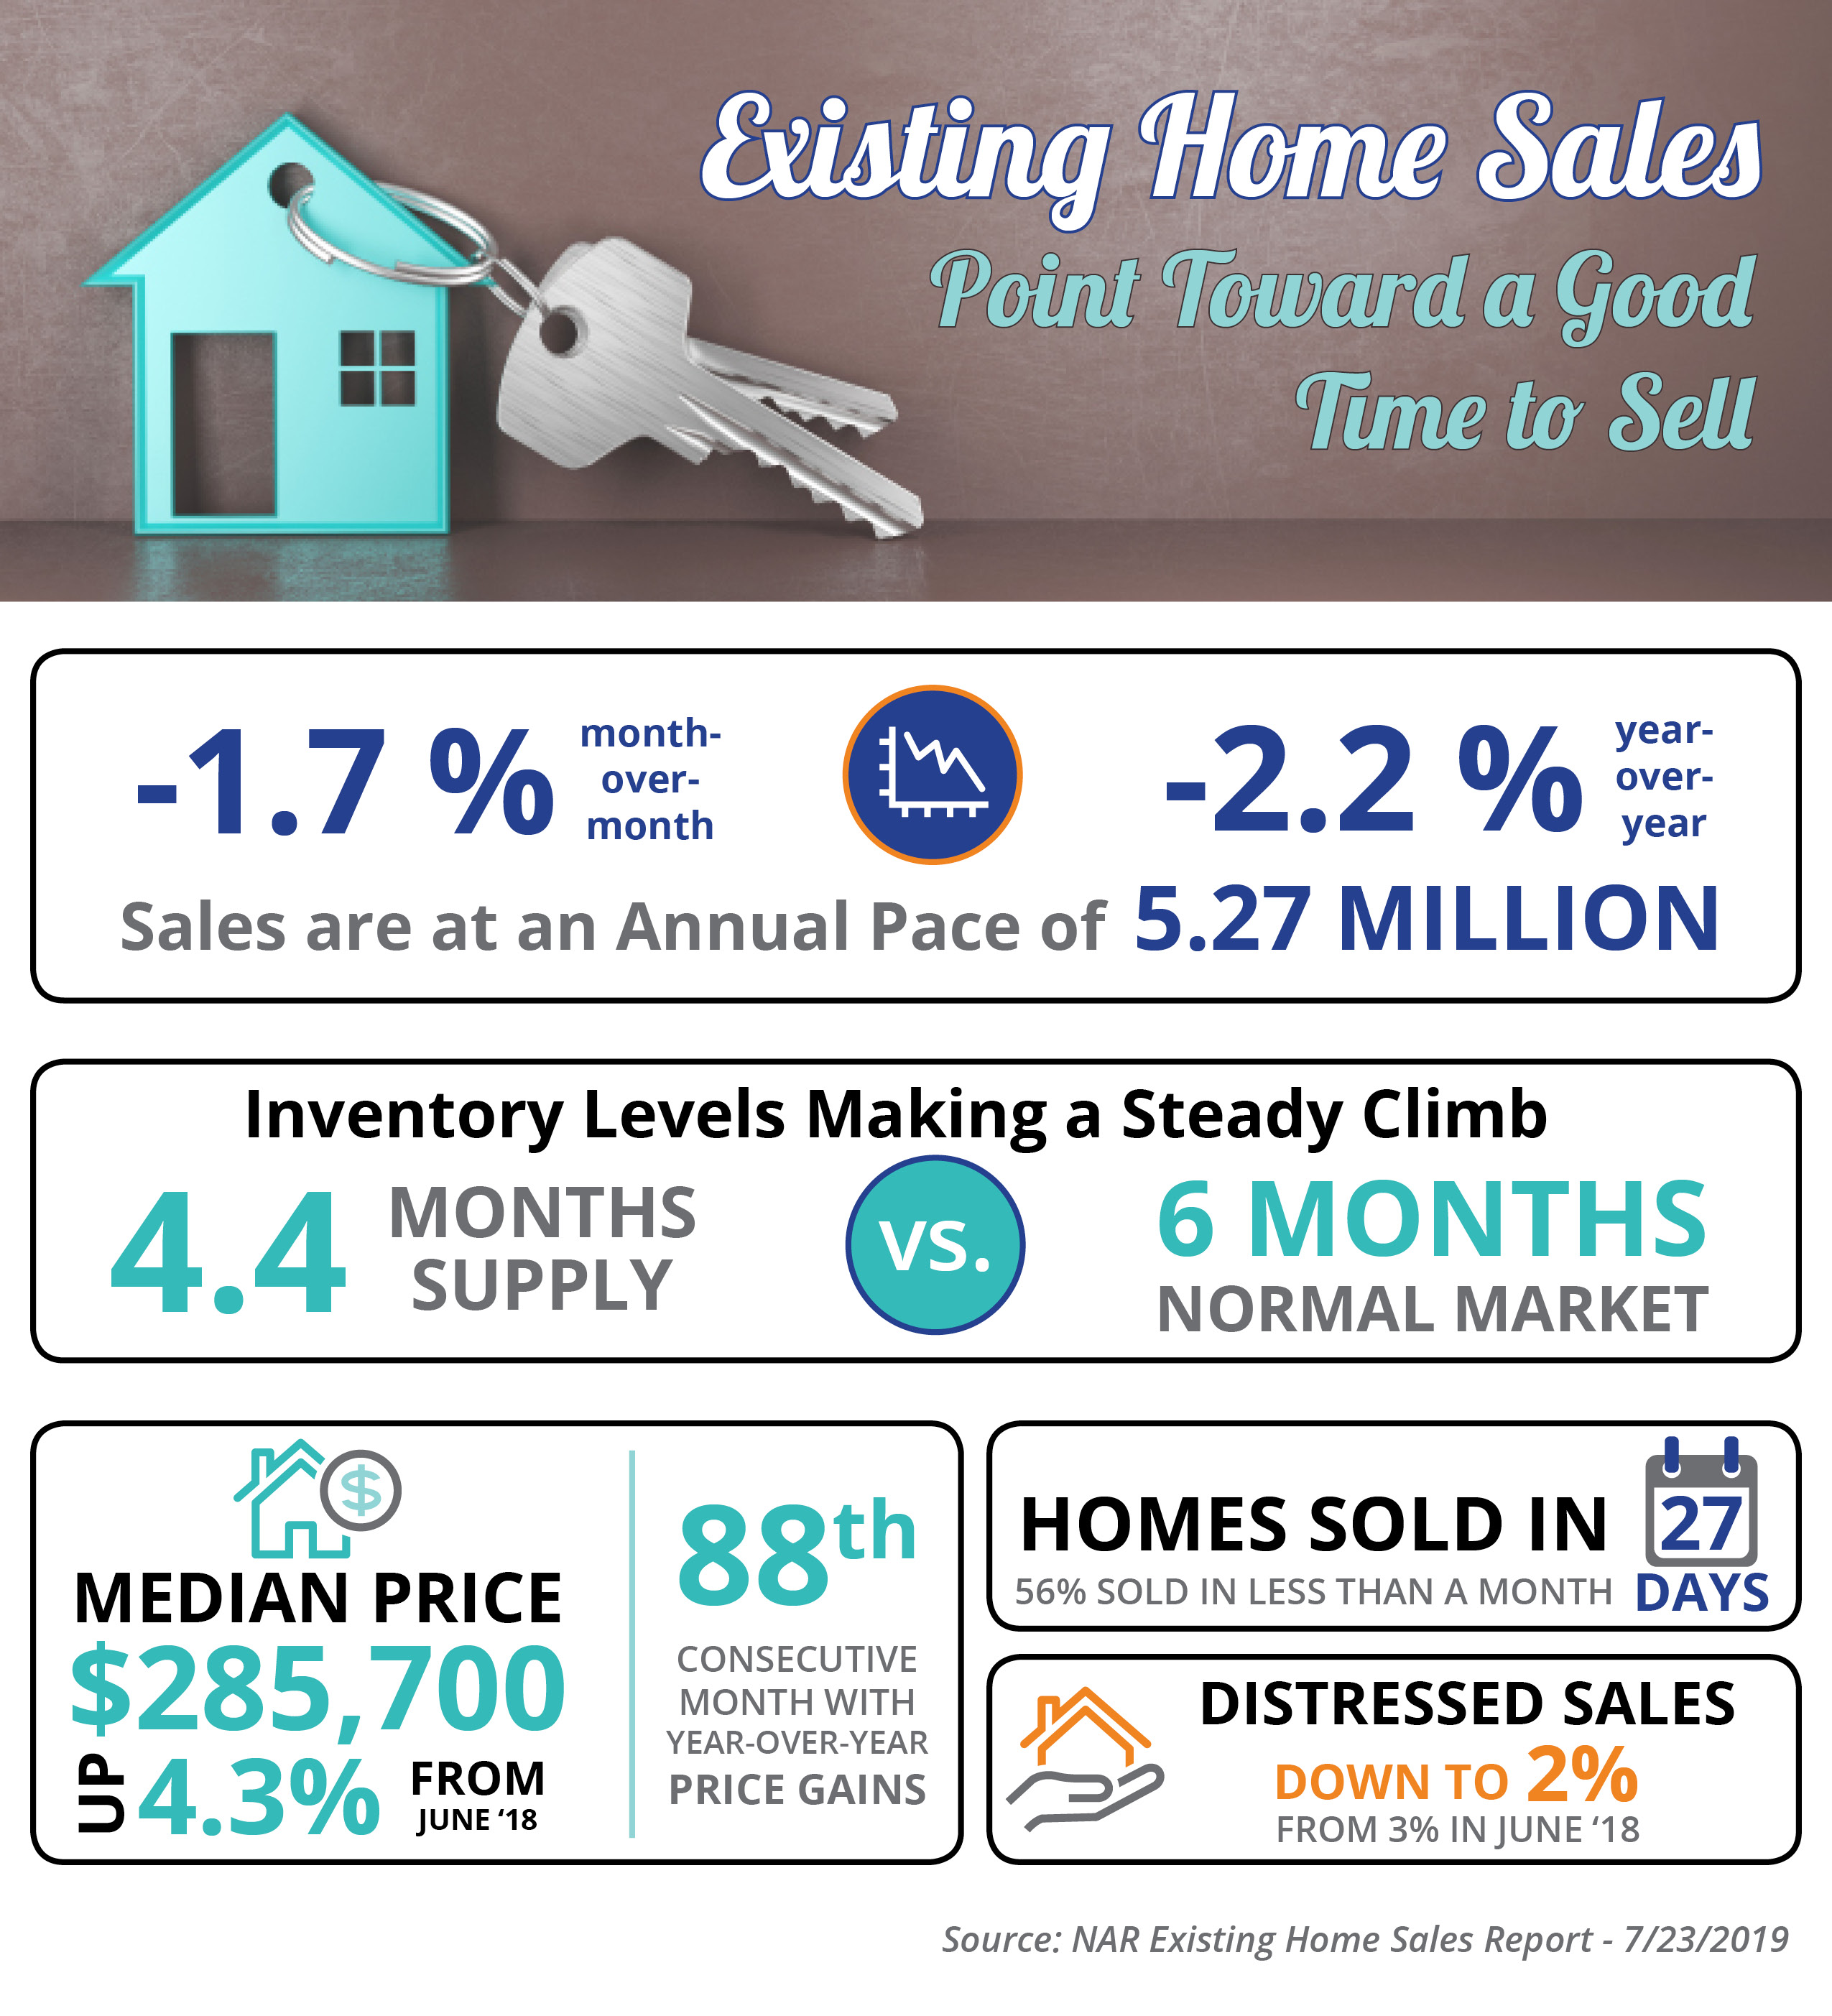 Existing Home Sales Point Toward a Good Time to Sell [INFOGRAPHIC] | MyKCM